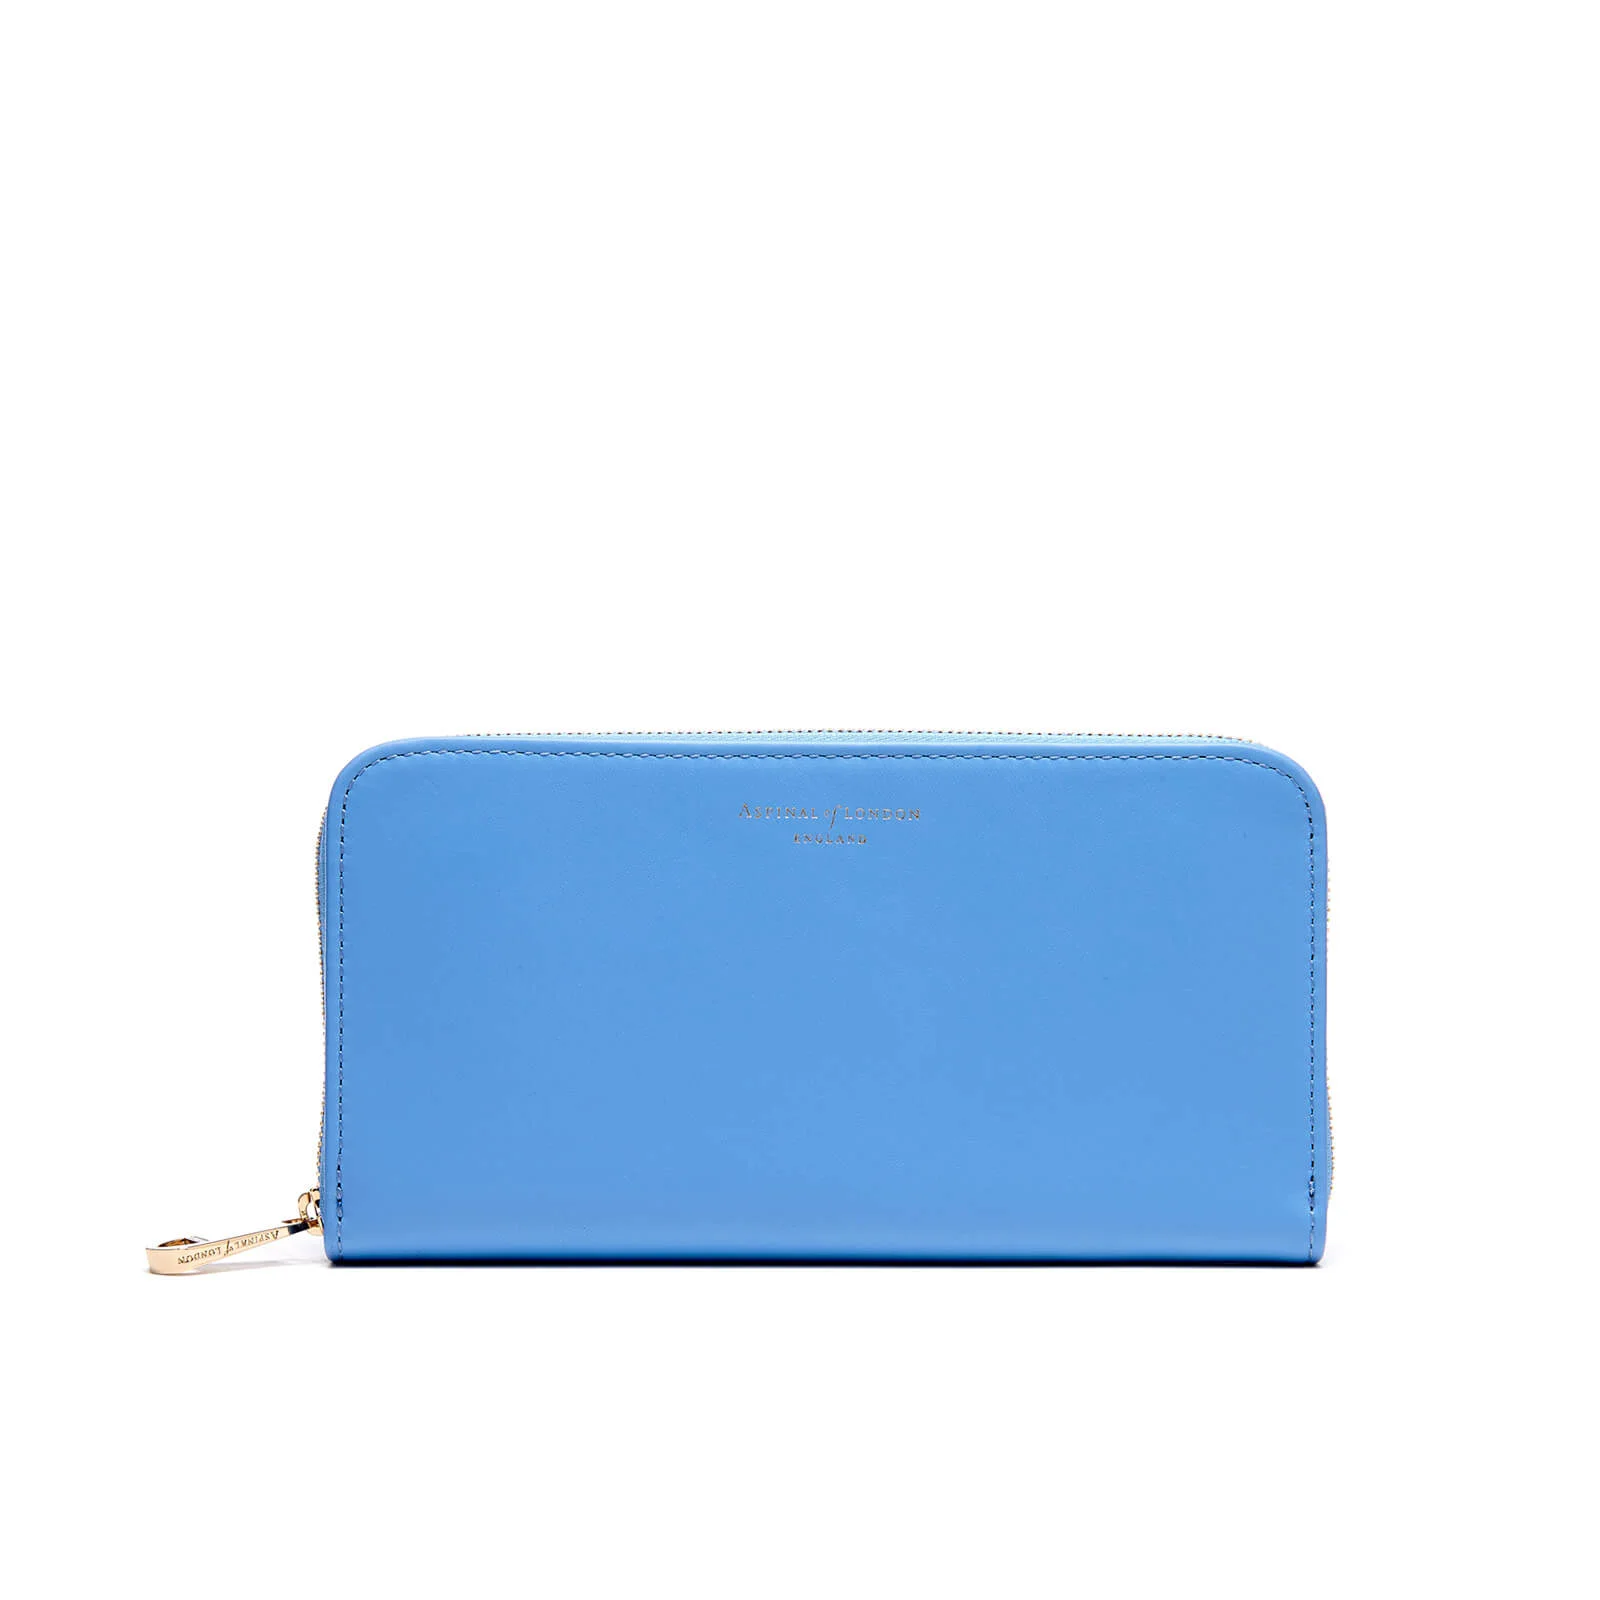 Aspinal of London Women's Continental Clutch Purse - Forget Me Not Image 1